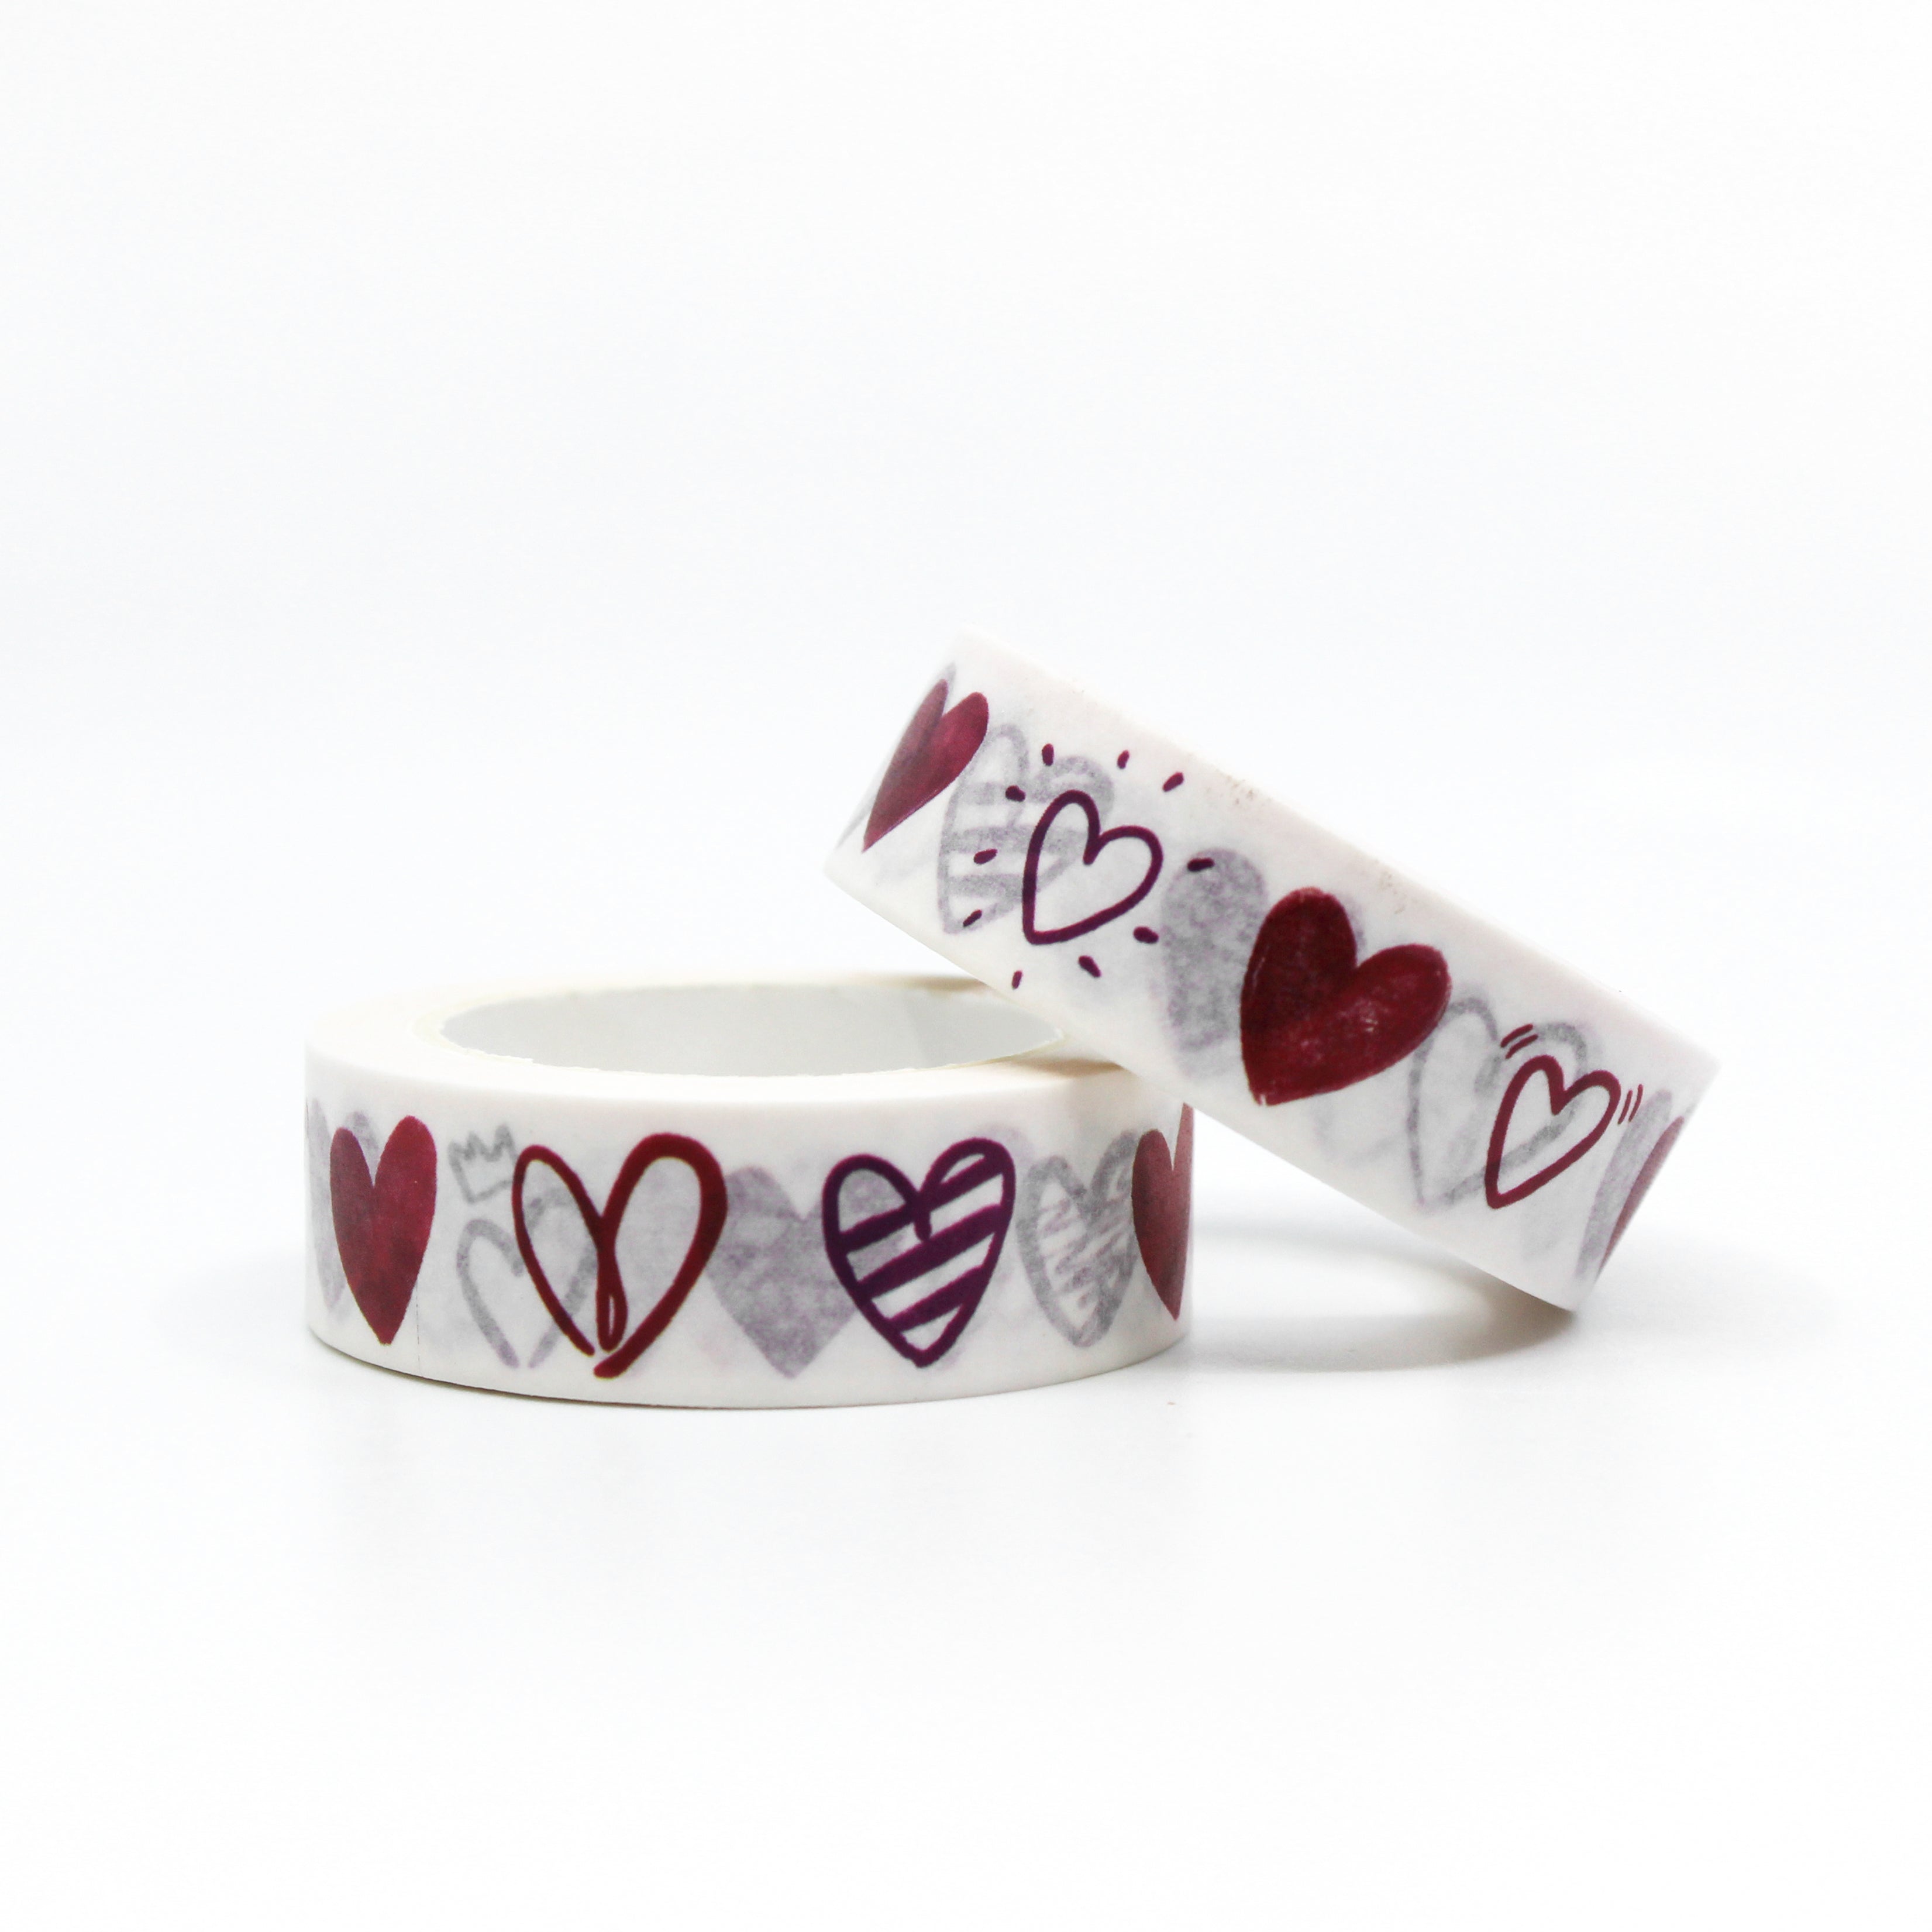 This is a nice red sketchy hearts washi tapes from BBB Supplies Craft Shop